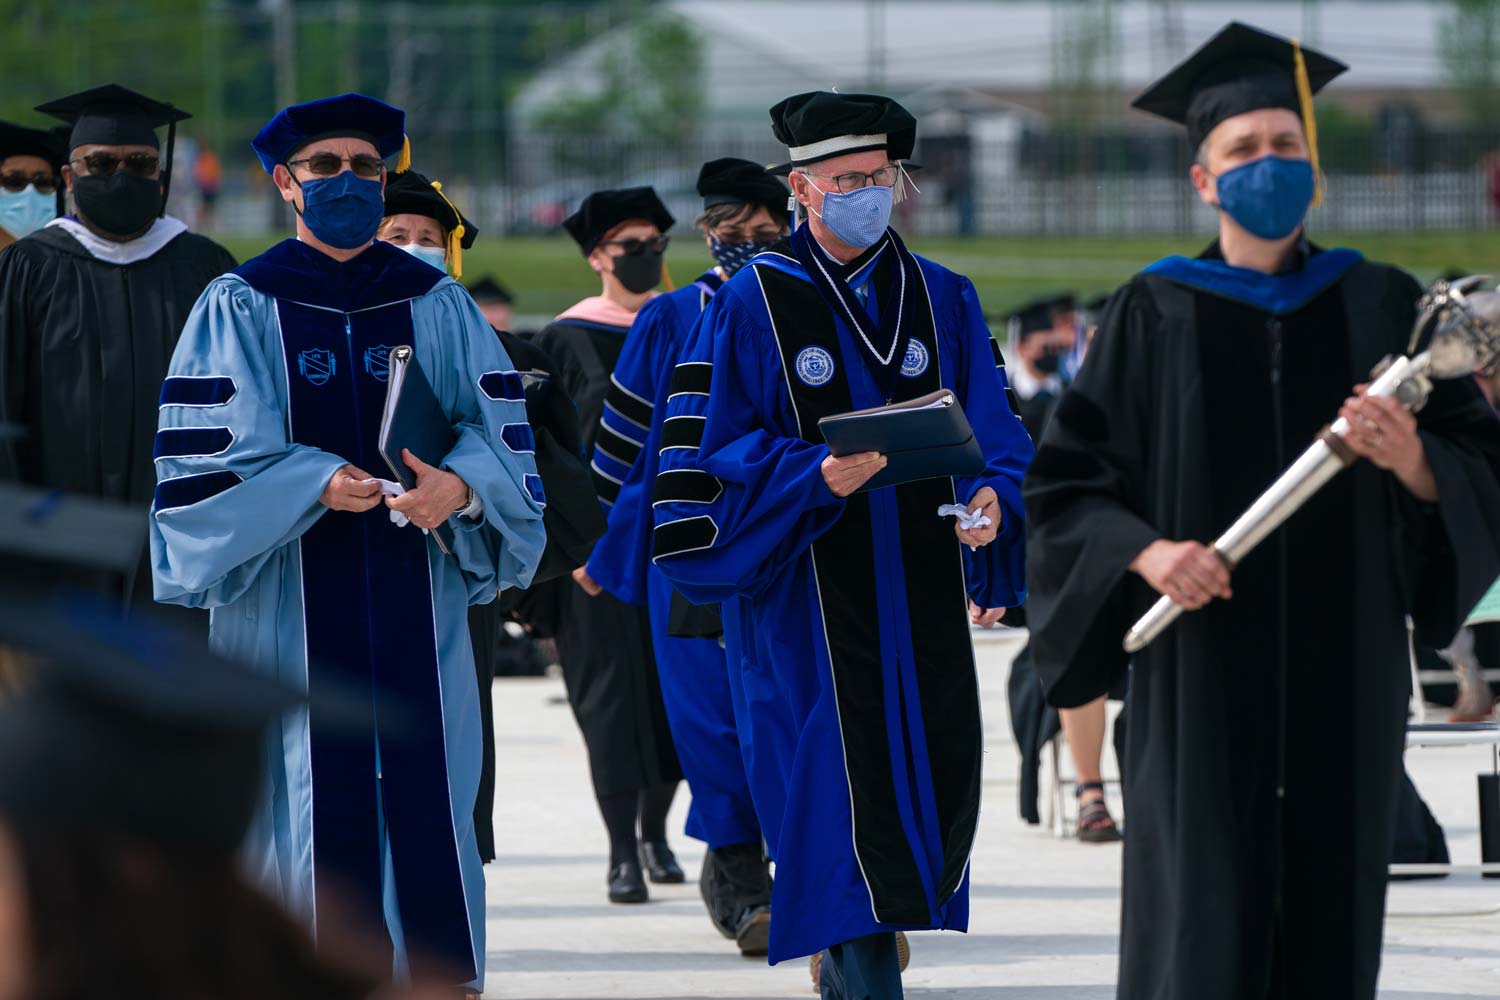 The dean and several other professors and speakers clad in gowns and caps walk through the center aisle at the graduation ceremony